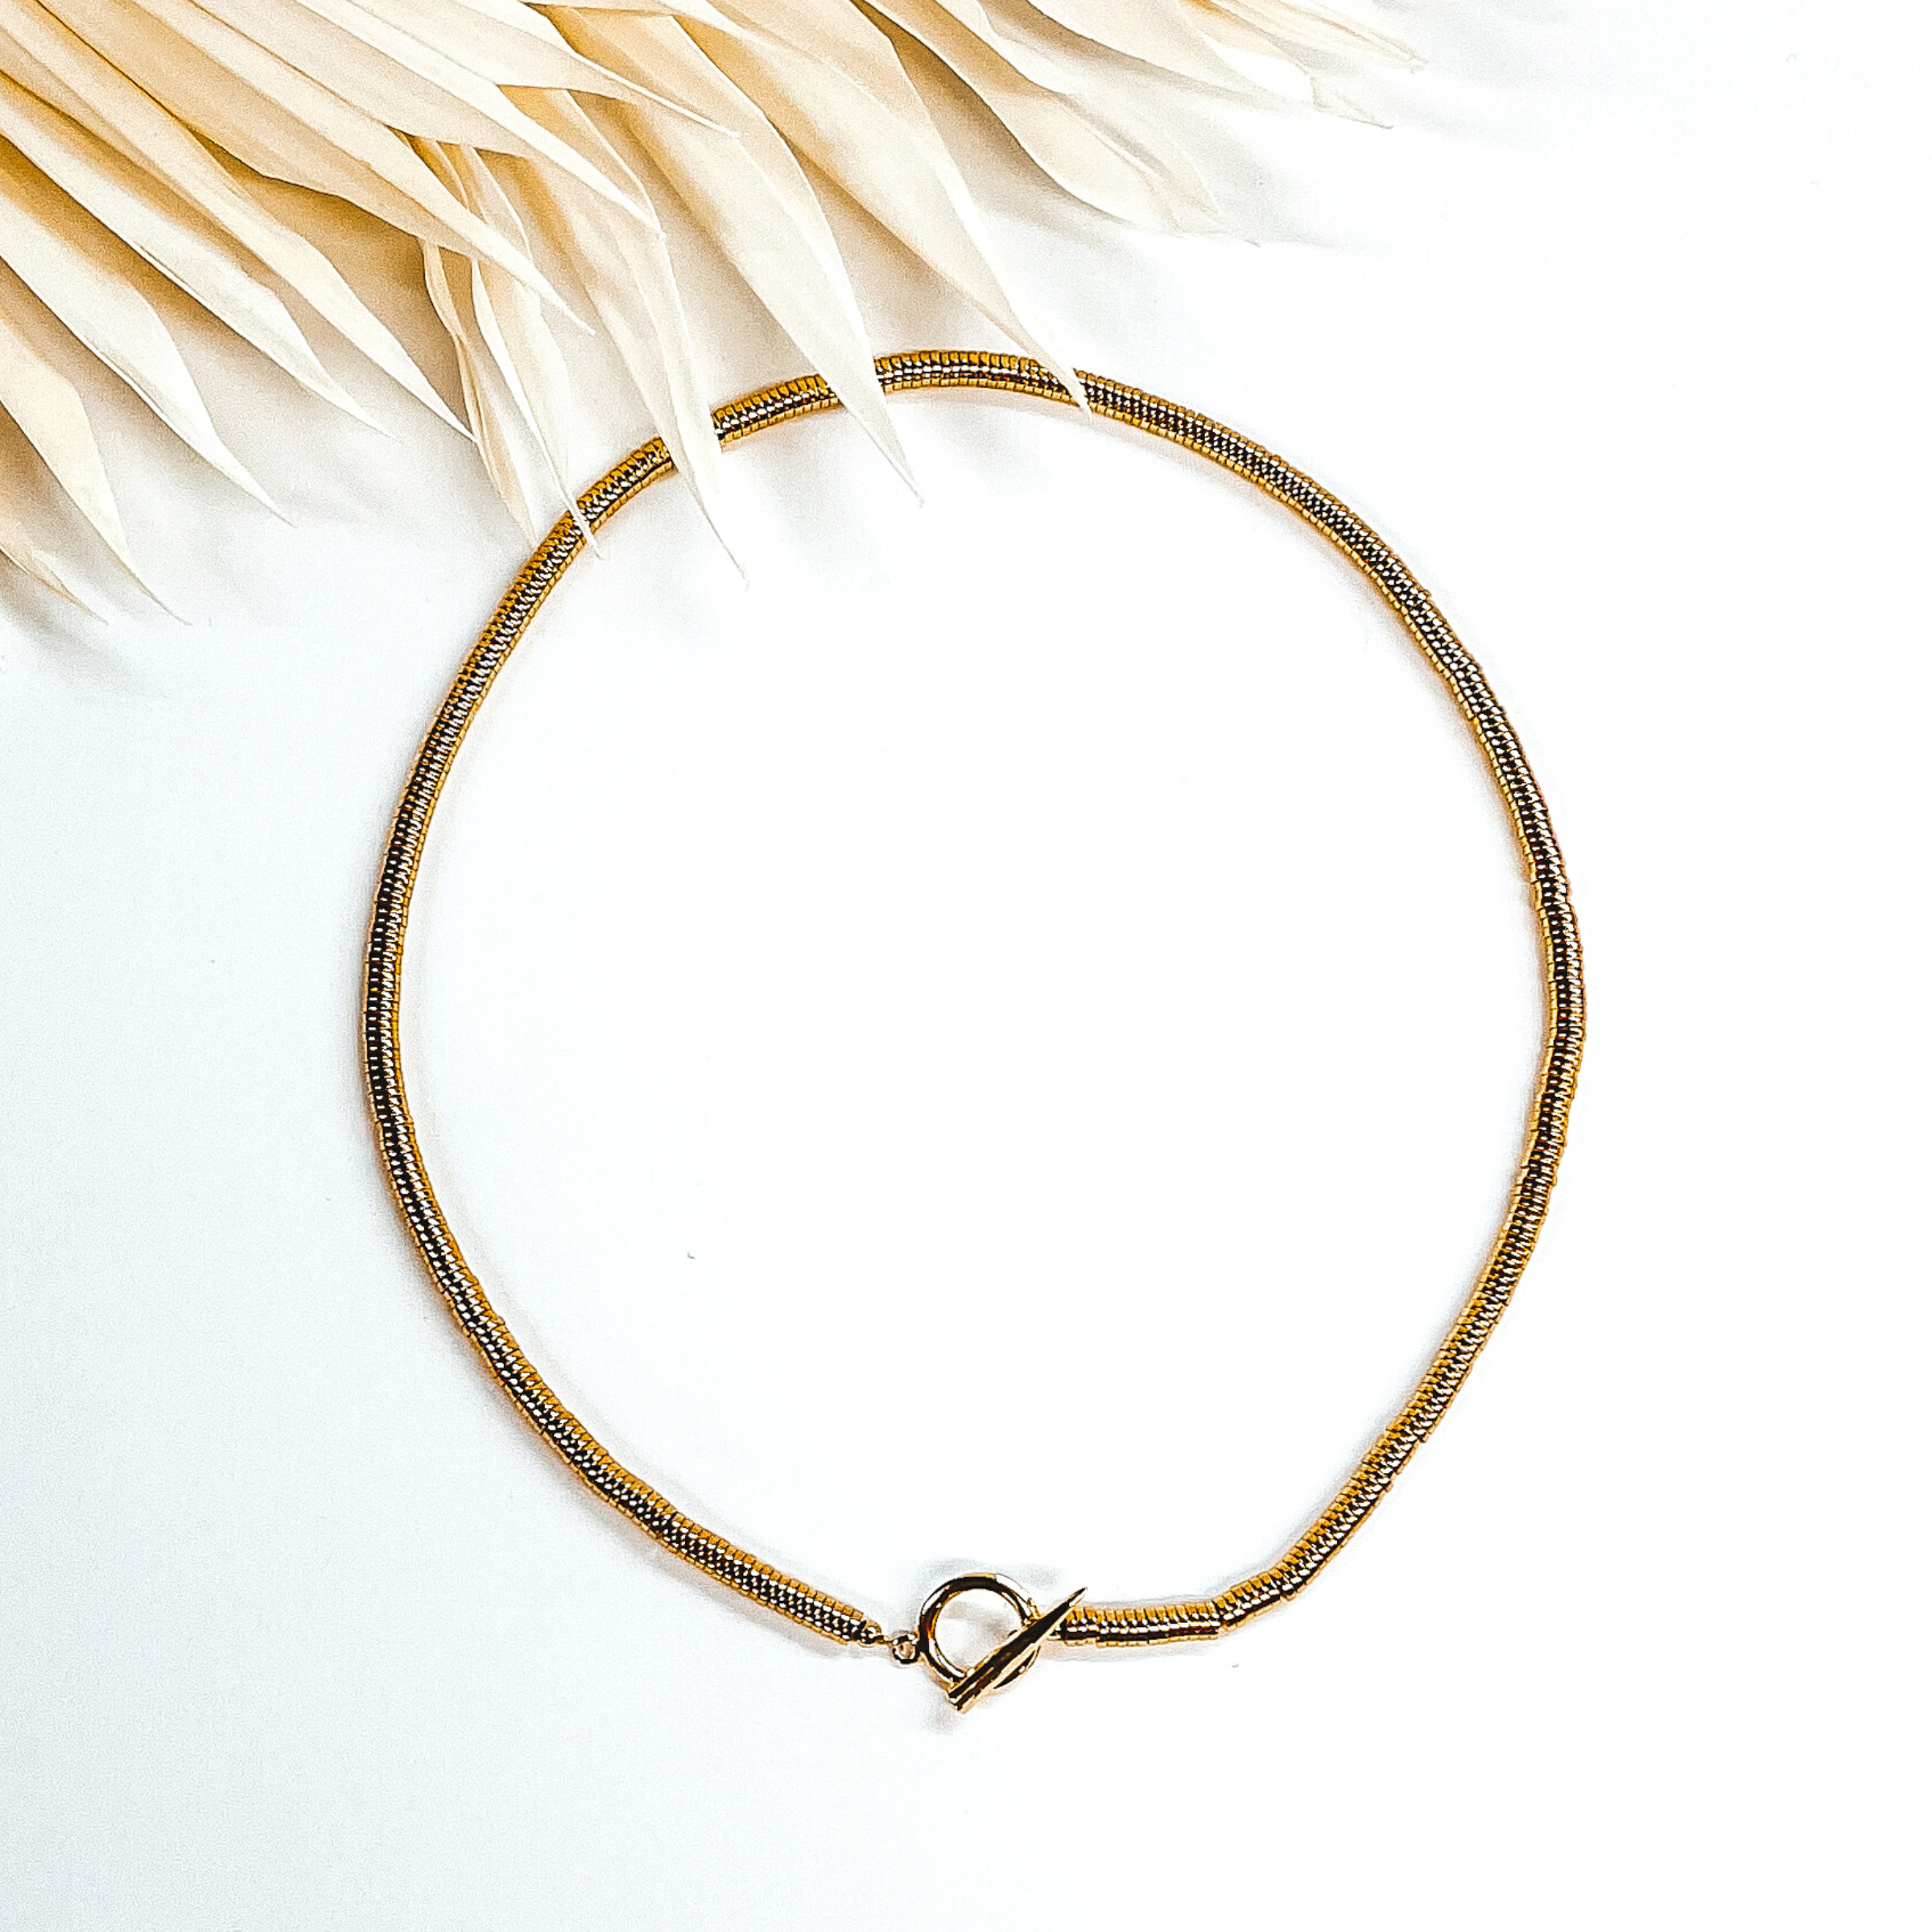 Gold disk beaded necklace with front toggle clasp. This necklace is pictured on a white background with ivory leaves at the top.